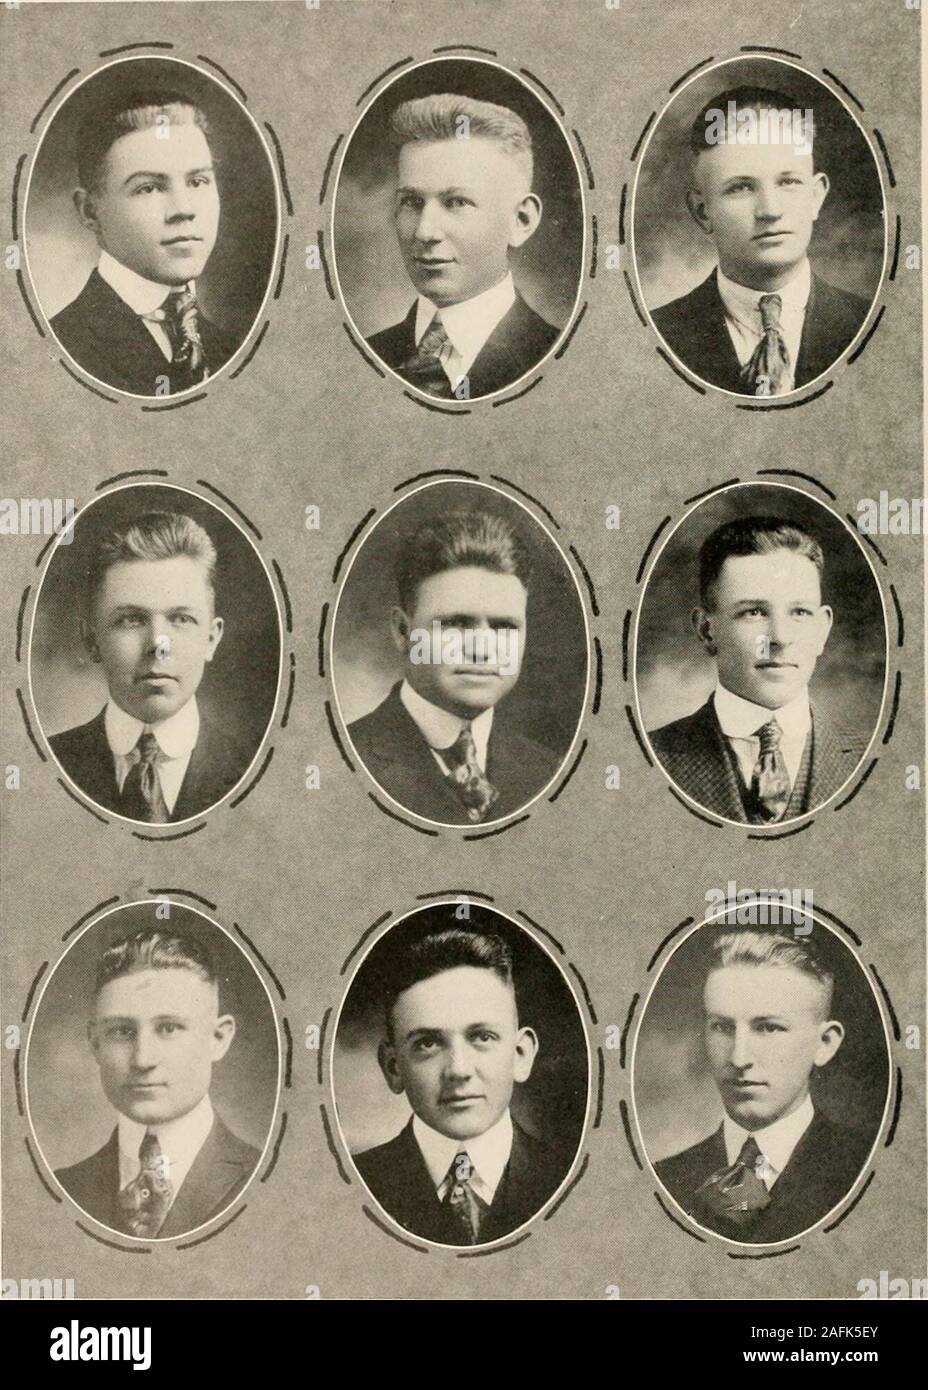 . PaC-SaC 1919. Miss Bailey,Collegian Sponsor THE COLLEGIAN STAFF L. B. Woodson Editor-in-Chief K. E. Townsend Business Manager A B. Stall worth Asst. Business Manager R. A. Hope Literary Editor M. R. Williamson Literary Editor G H. Estes Exchange Editor J. T. Richardson Athletic Editor J. B. Hicklin Local Editor W. P. Beckman Y. M. C. A. Editor. Collegian Staff 0 SENECA I Rondeau I 0, Seneca, for long I sought to findThe Gem you hold—the ideal of my mind.And sought amiss until the happy hourI laid my eyes upon your blushing flower—The fairest rosebud of her gentle kind. And rightly so I sough Stock Photo